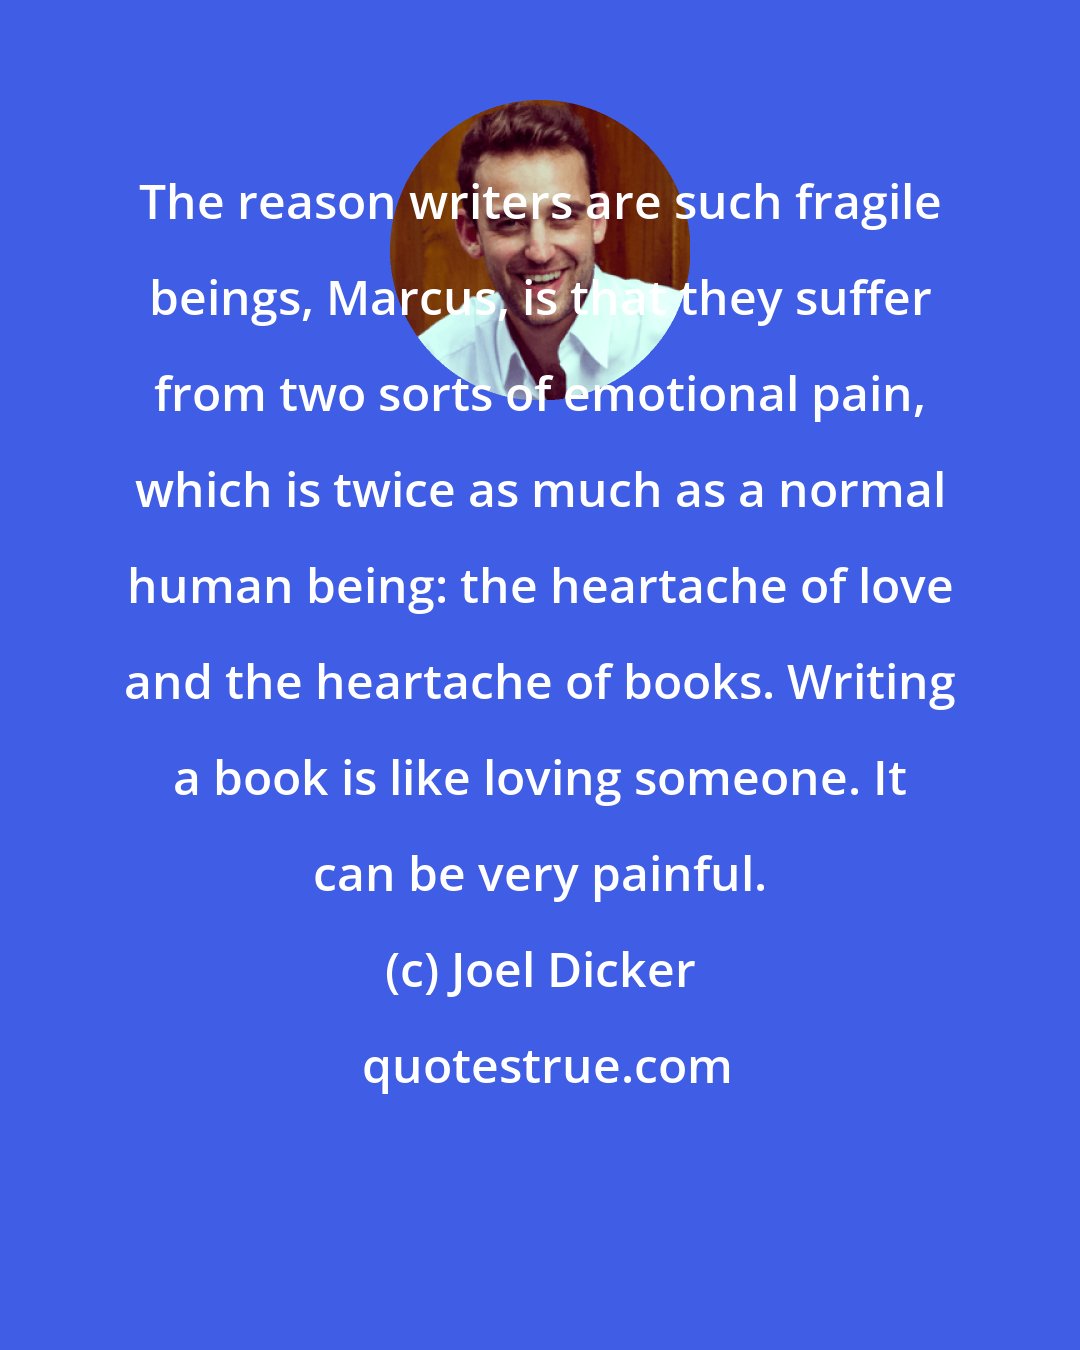 Joel Dicker: The reason writers are such fragile beings, Marcus, is that they suffer from two sorts of emotional pain, which is twice as much as a normal human being: the heartache of love and the heartache of books. Writing a book is like loving someone. It can be very painful.